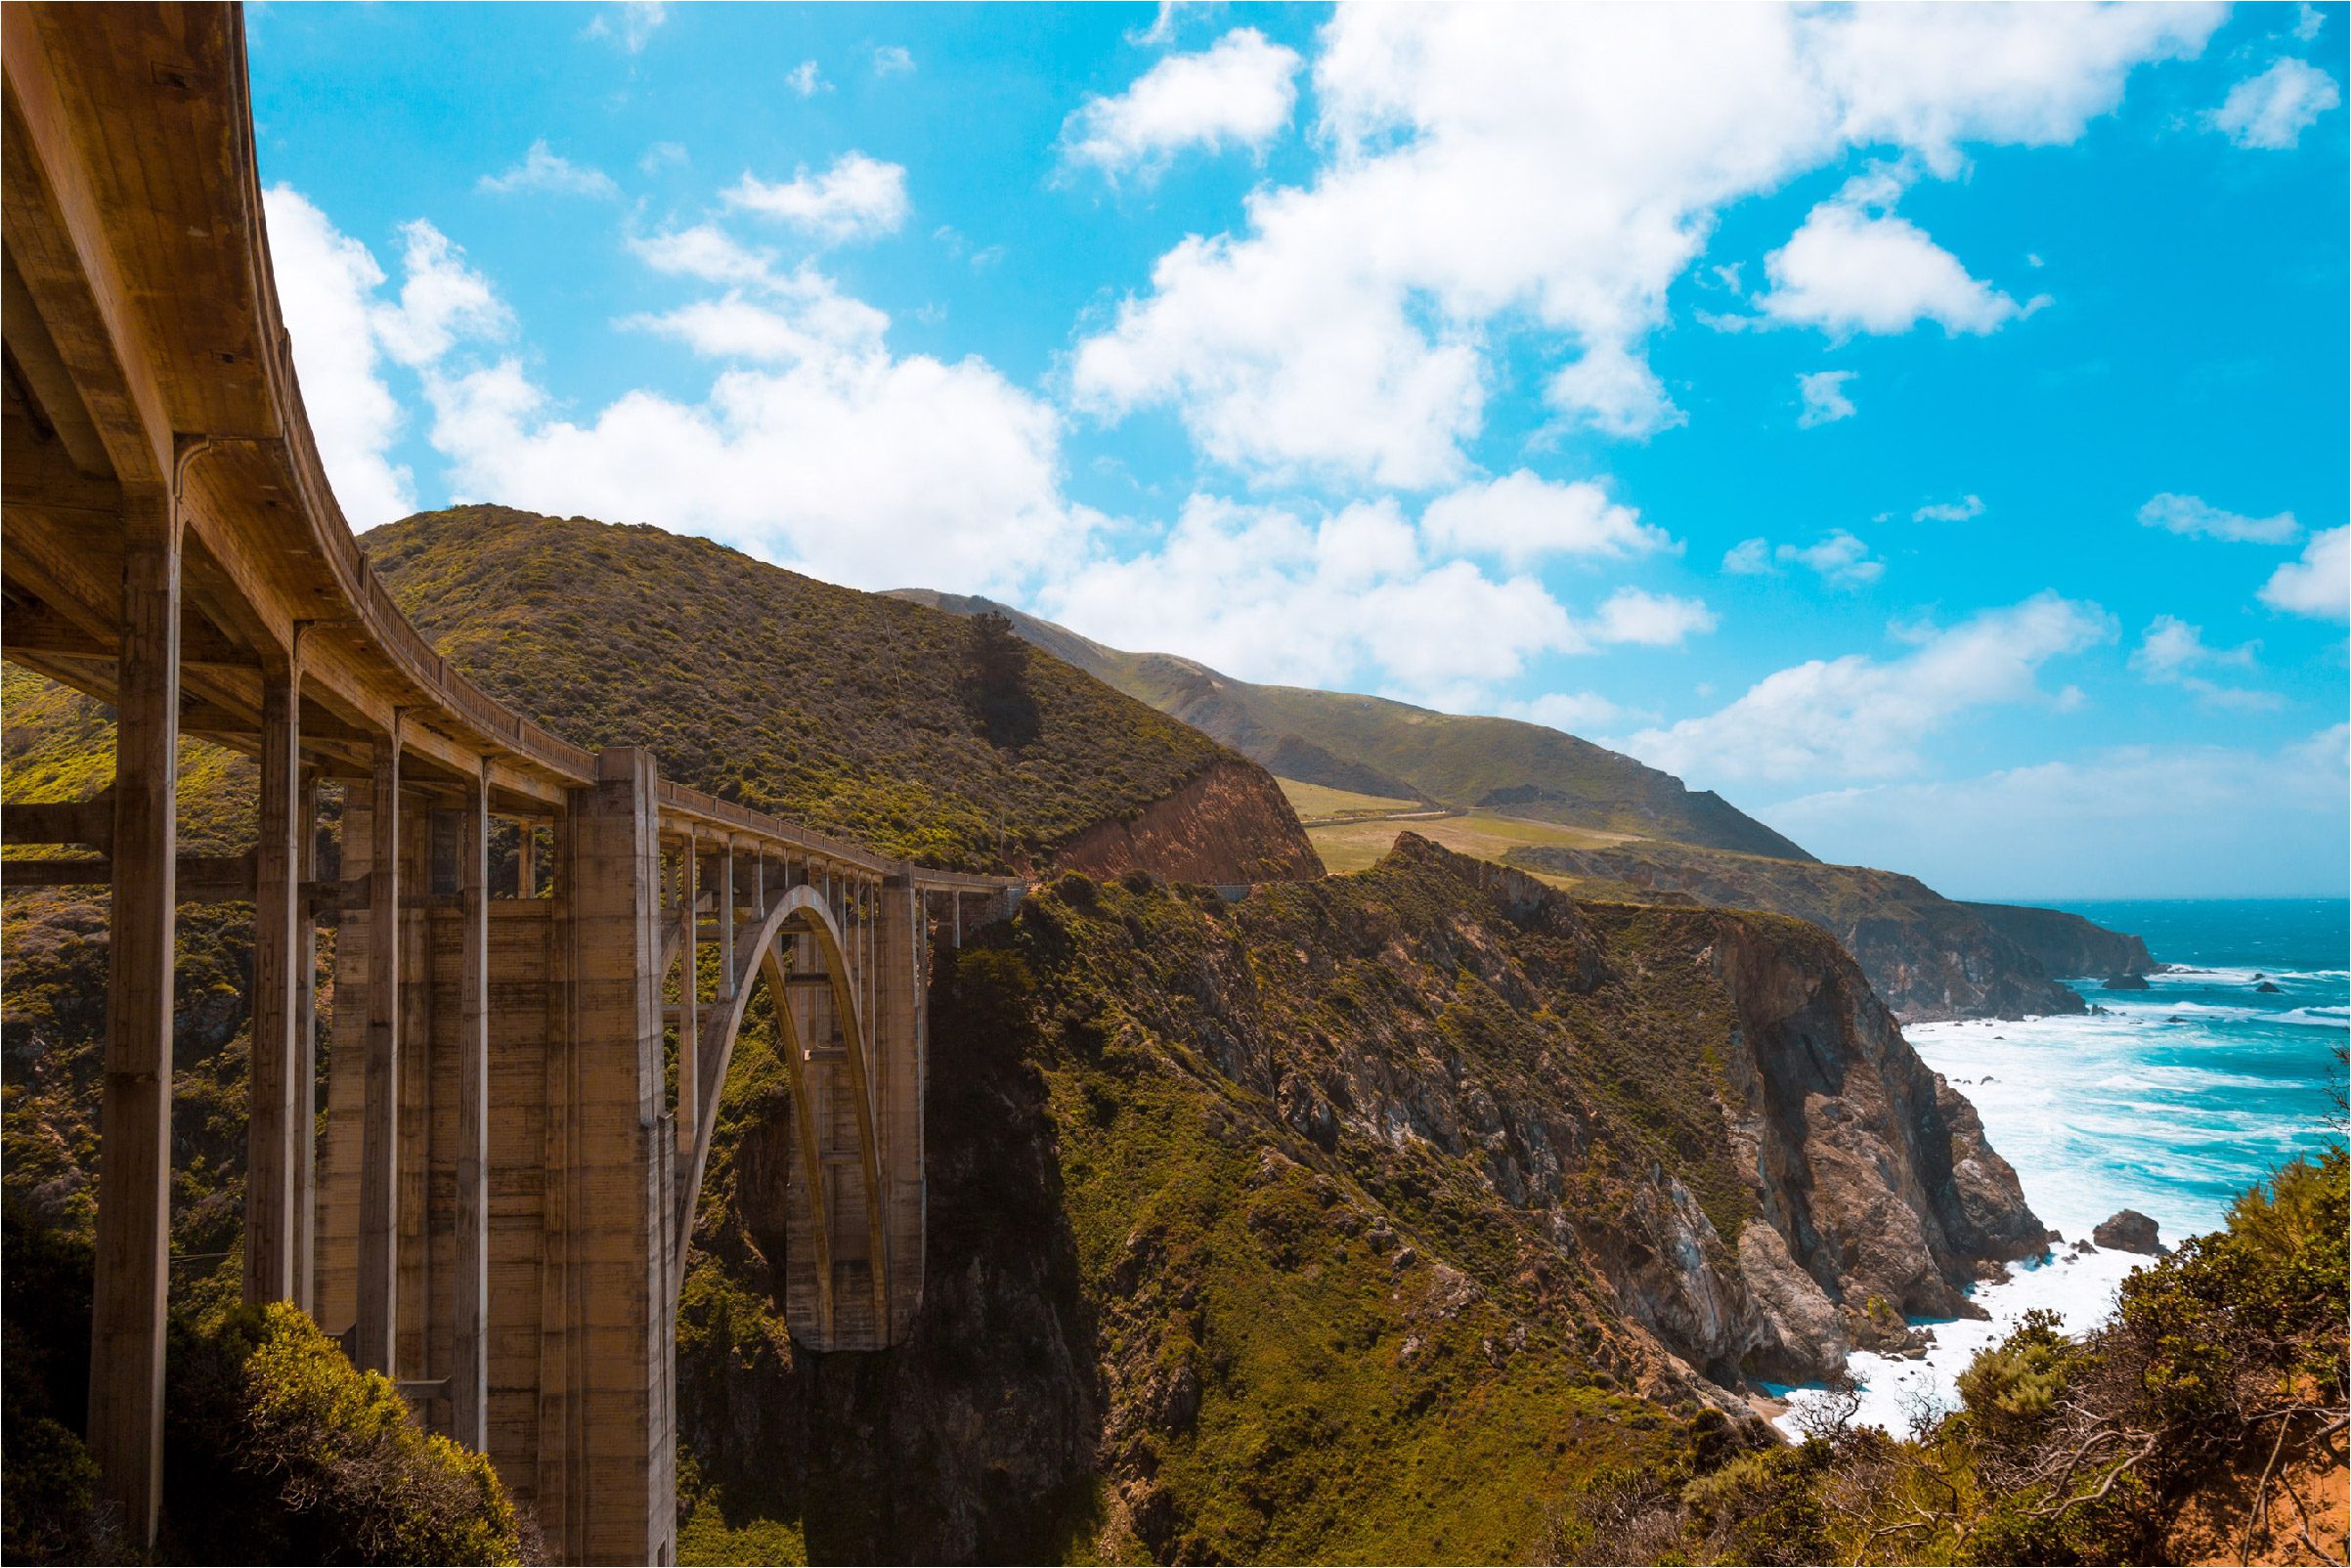 Big Sur with blue skies and a view of the Bixby Bridge.